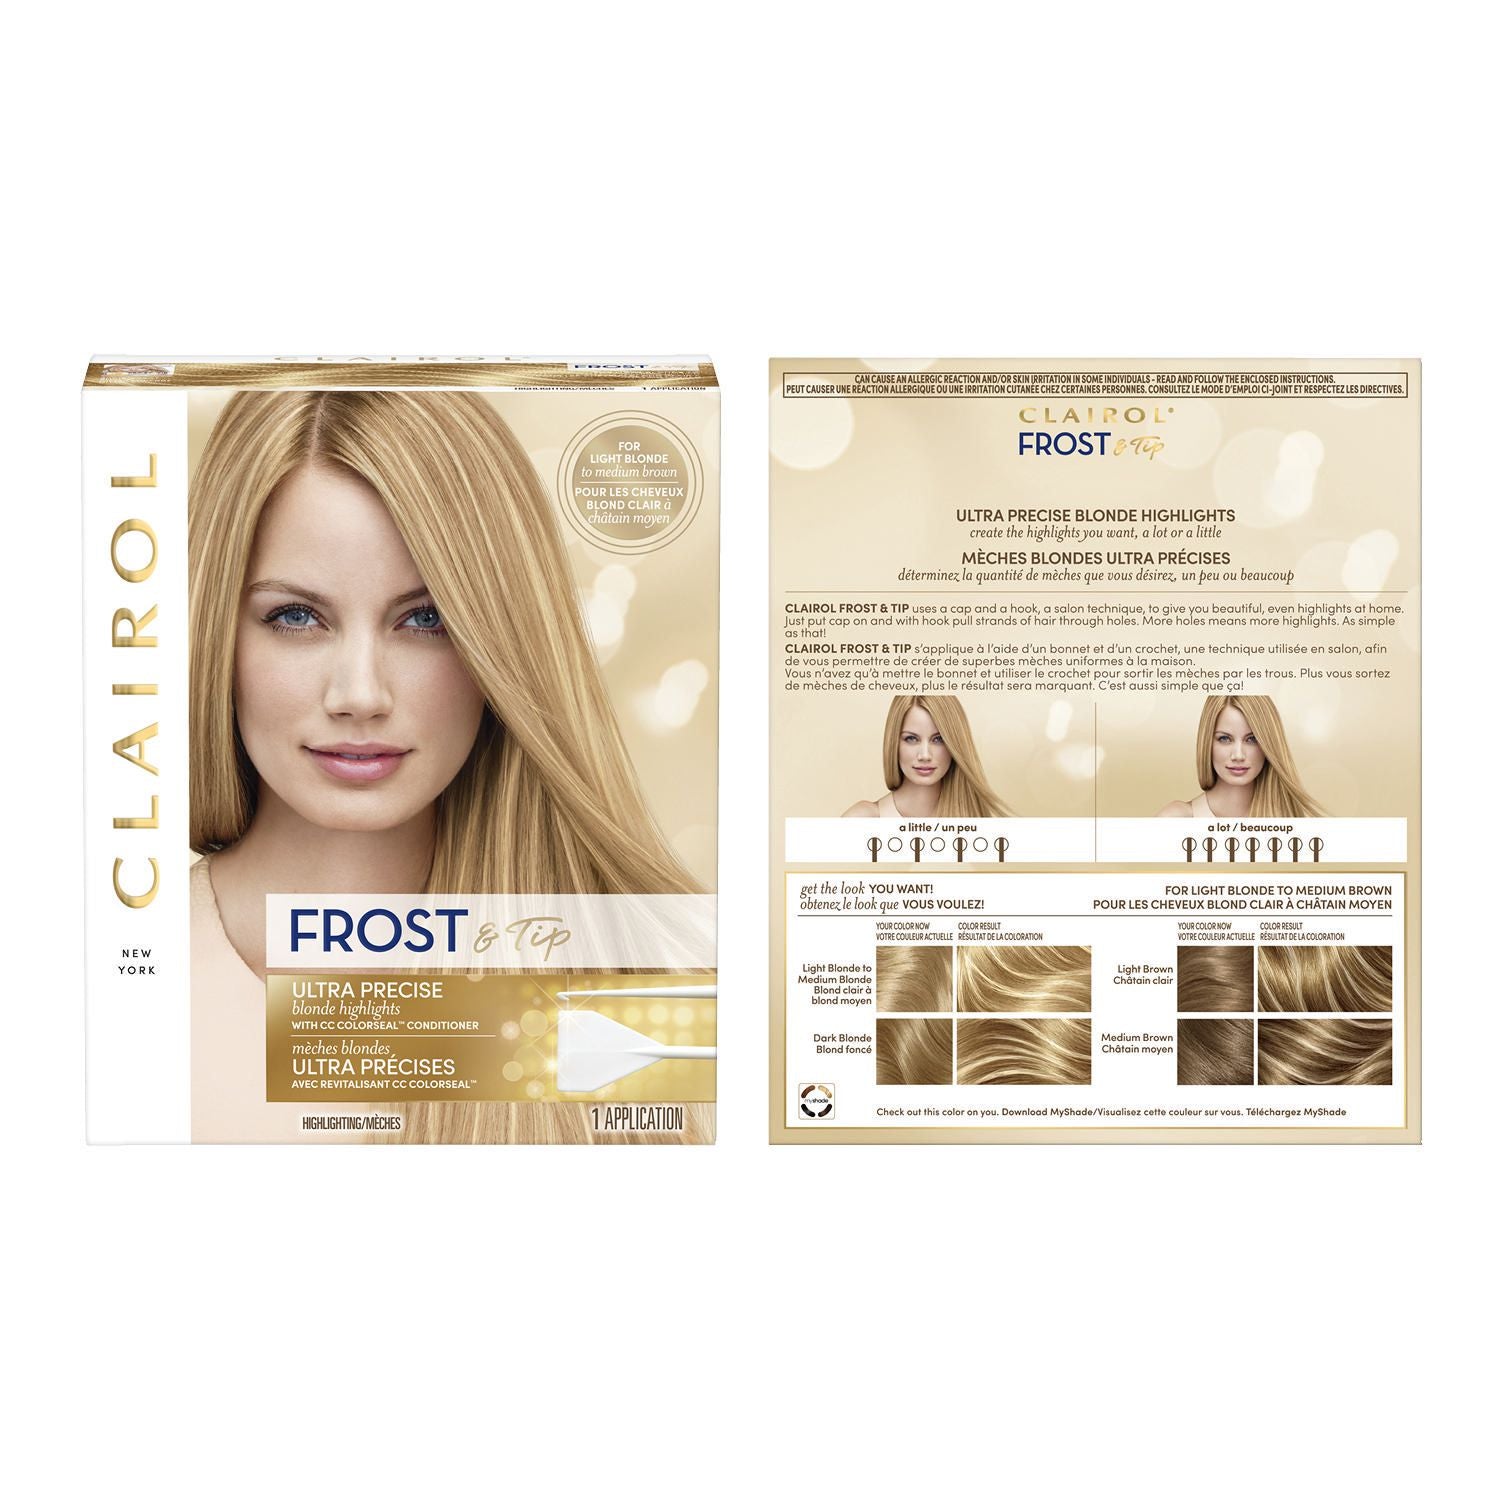 Clairol Frost & Tip Highlighting Kit 1 Application